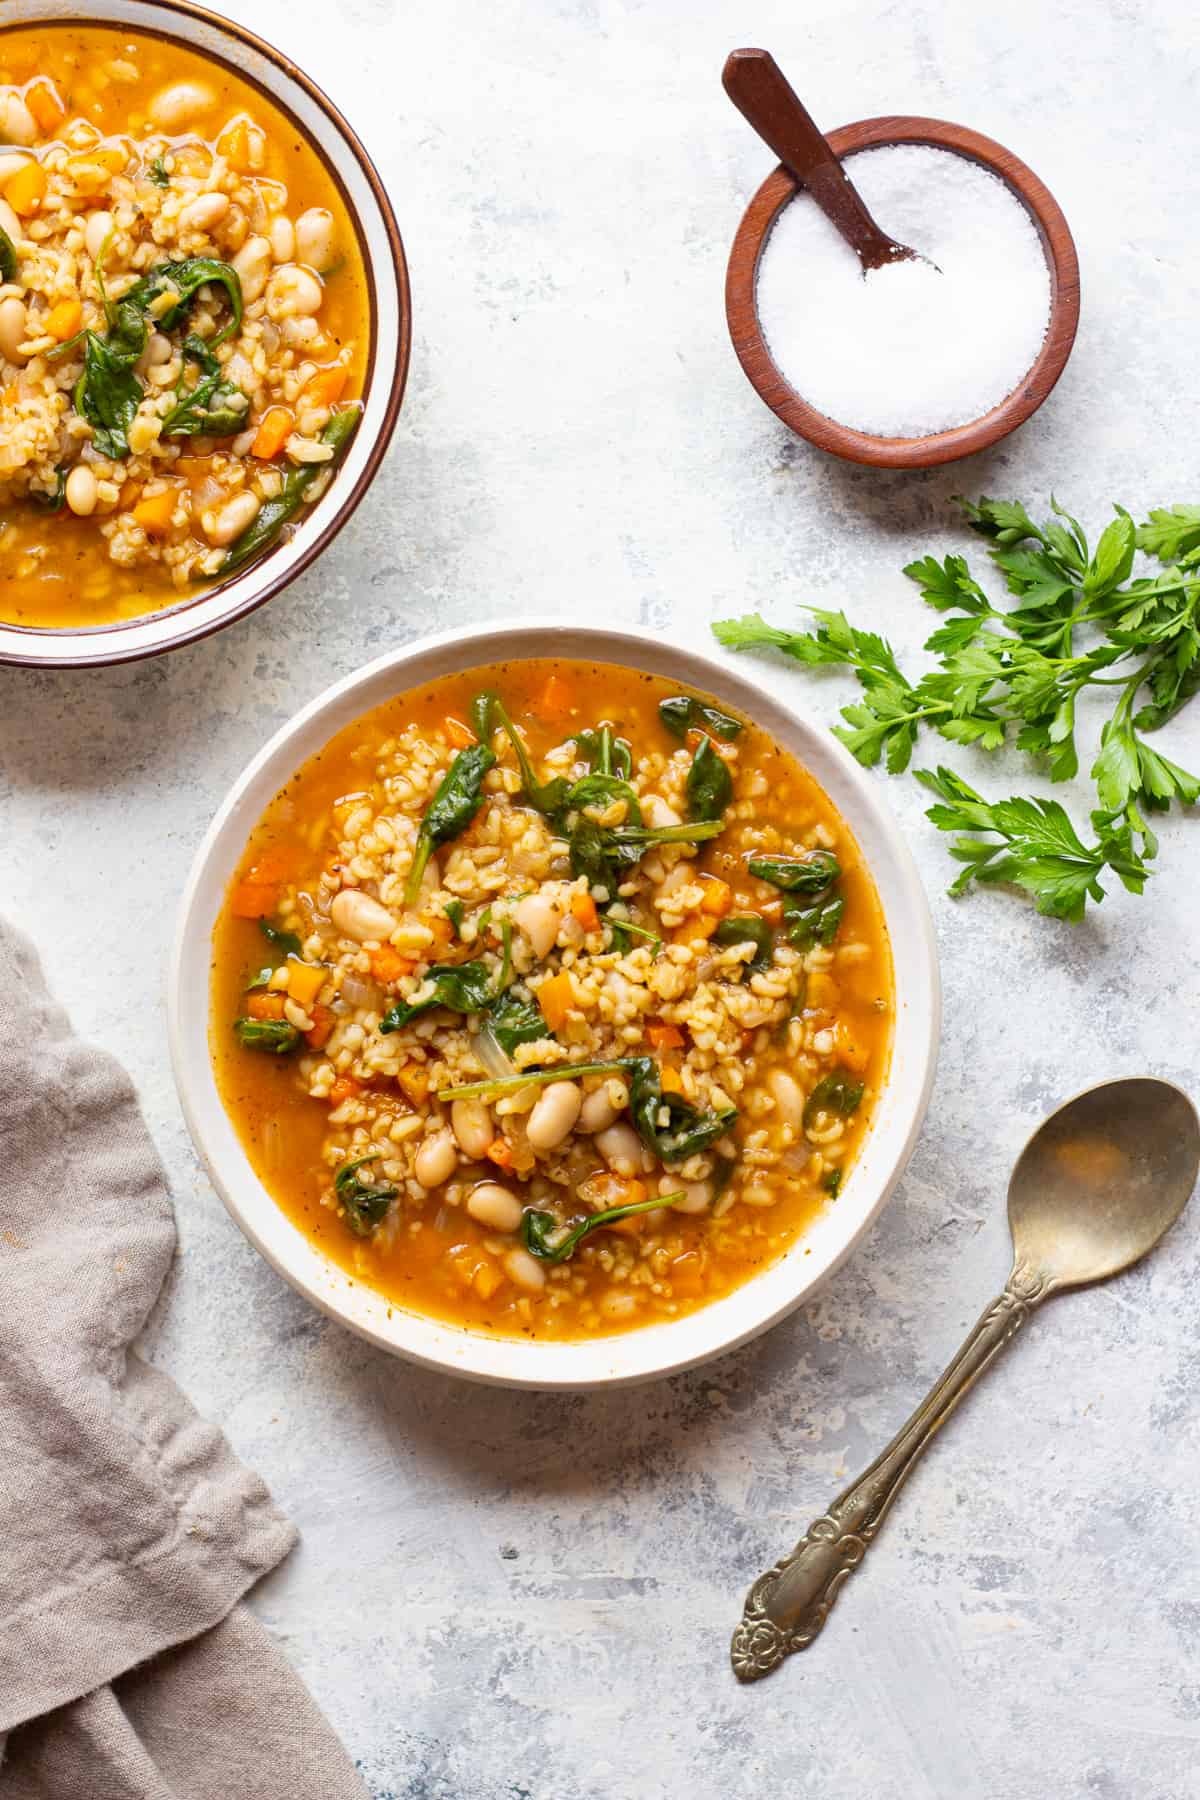 Quick and easy Instant pot vegetable soup with a Mediterranean twist. This pressure cooker soup recipe is perfect as a light dinner or lunch. Make sure to watch the video to learn how to make Mediterranean vegetable soup in instant pot.